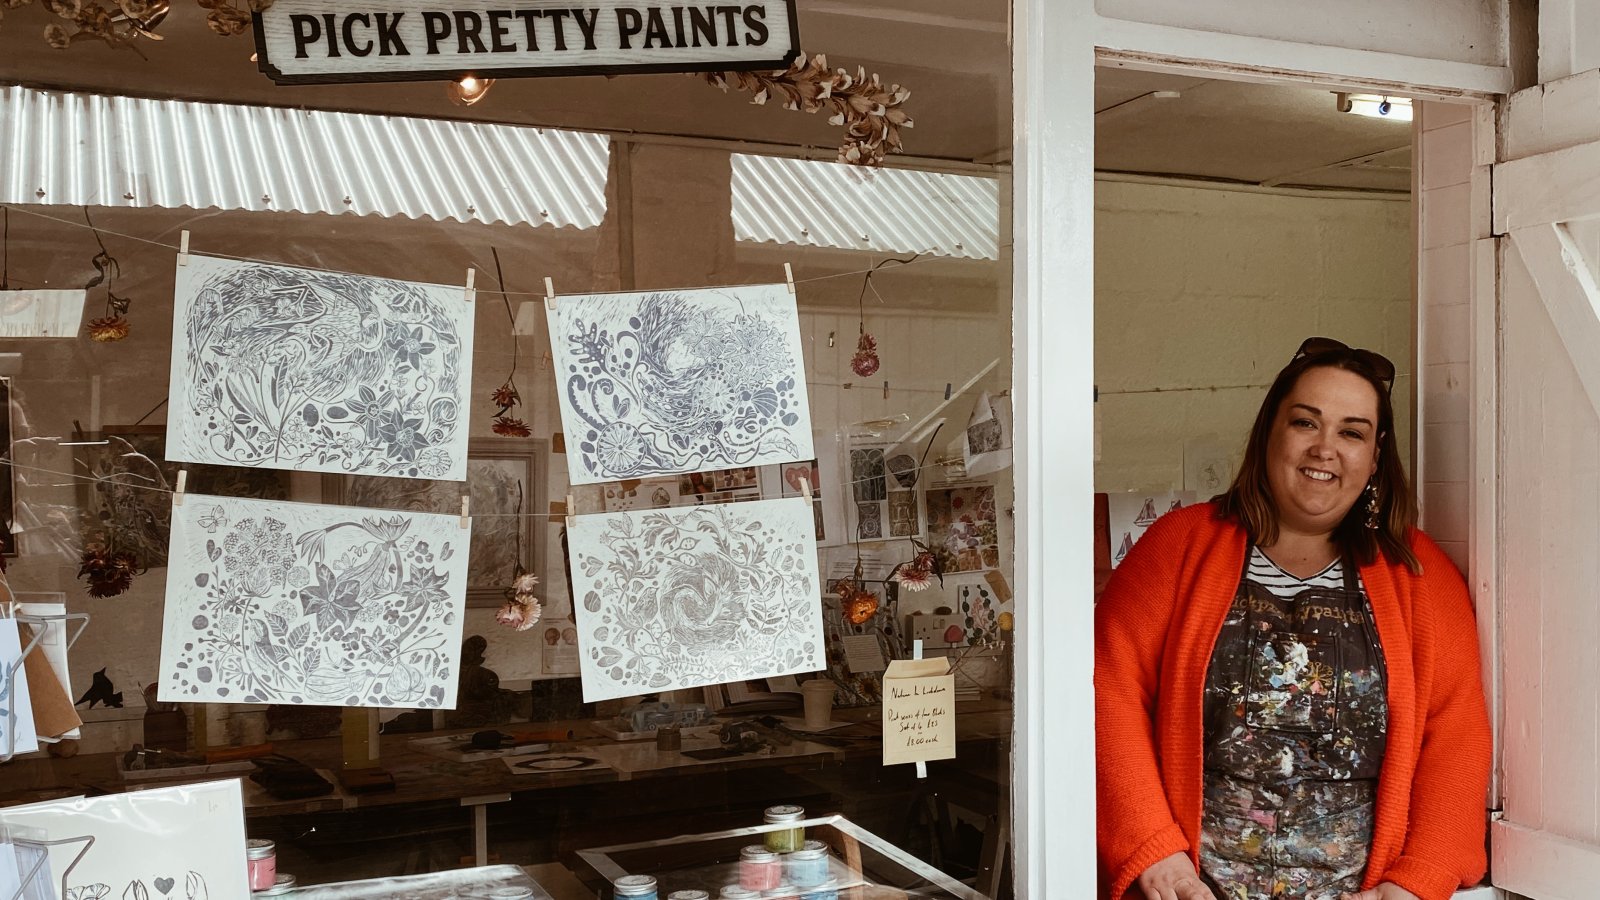 Stamp making workshop at Pick Pretty Paints, St Ives